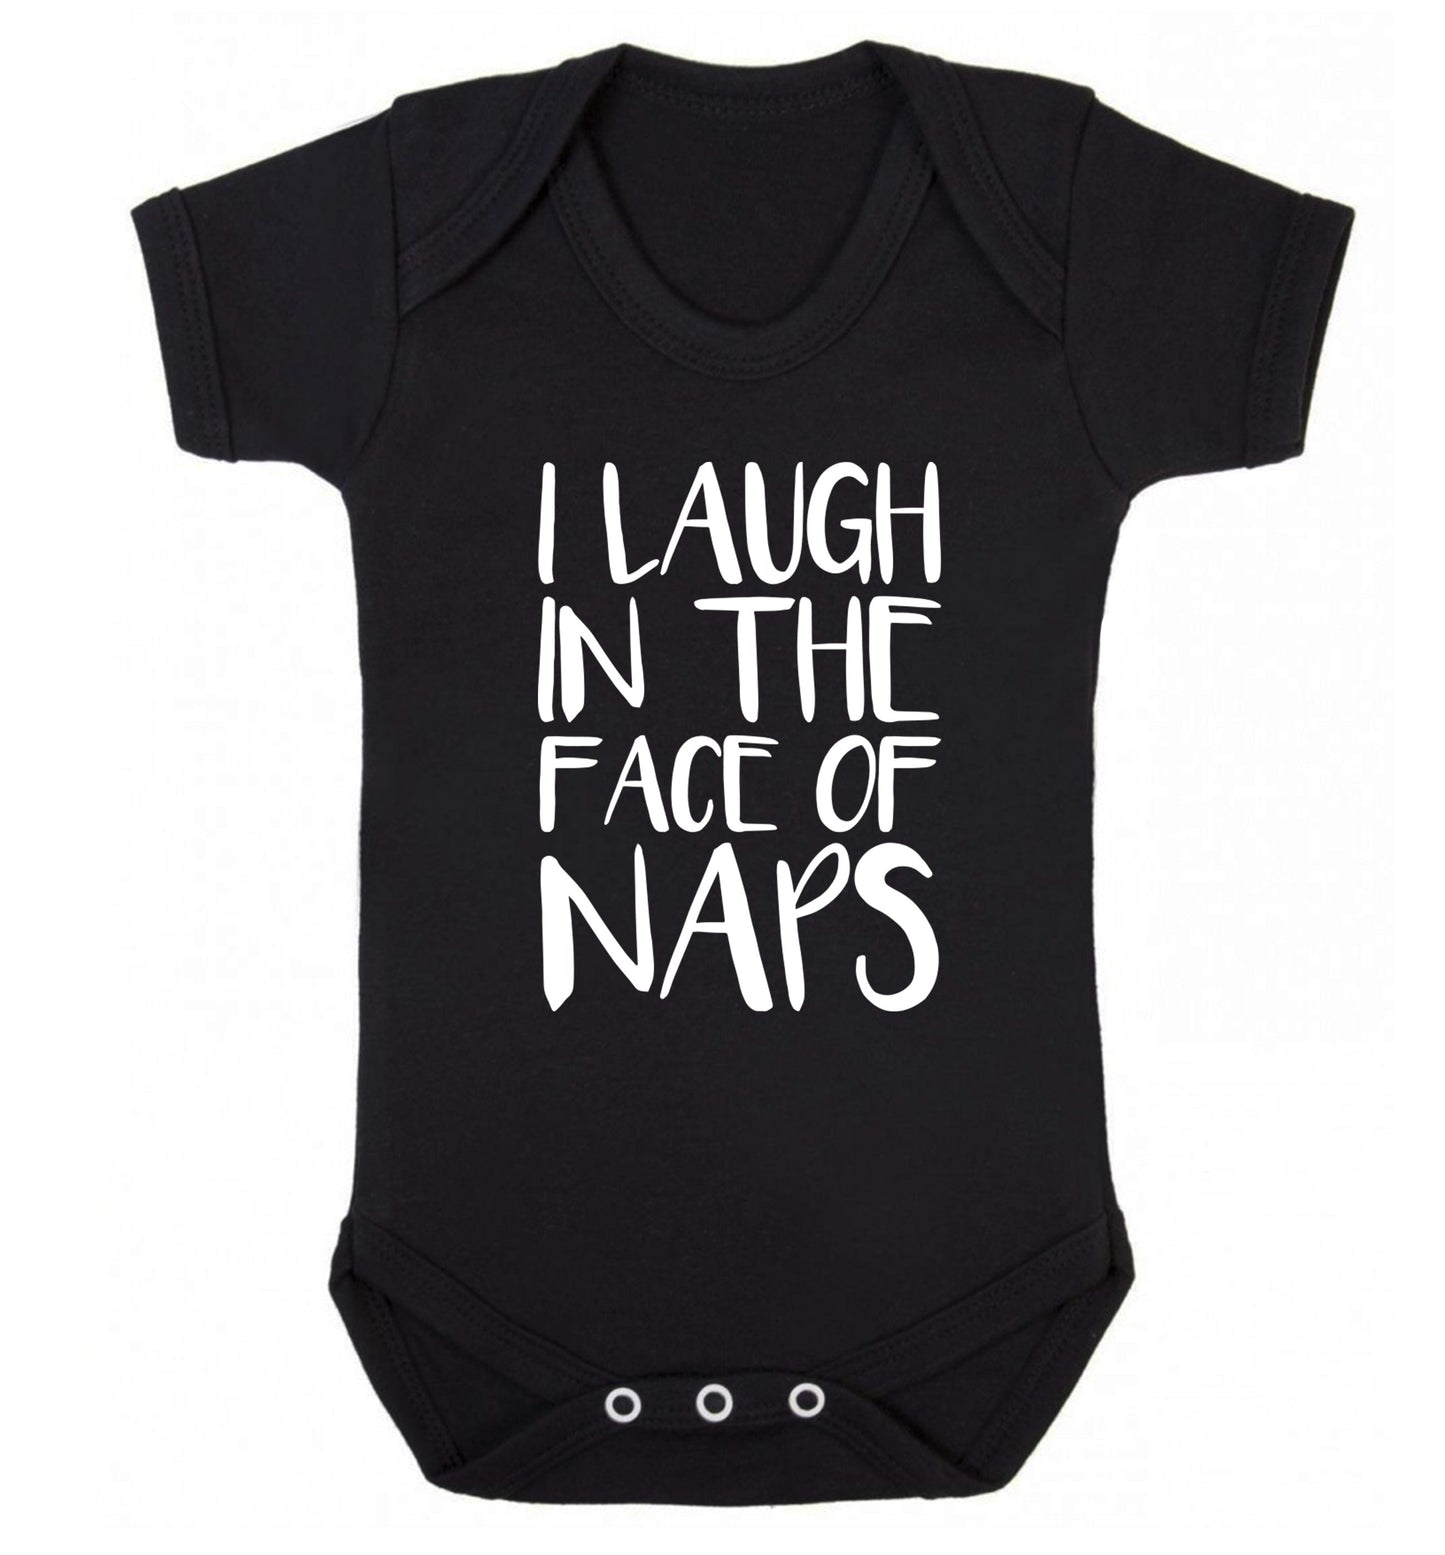 I laugh in the face of naps Baby Vest black 18-24 months